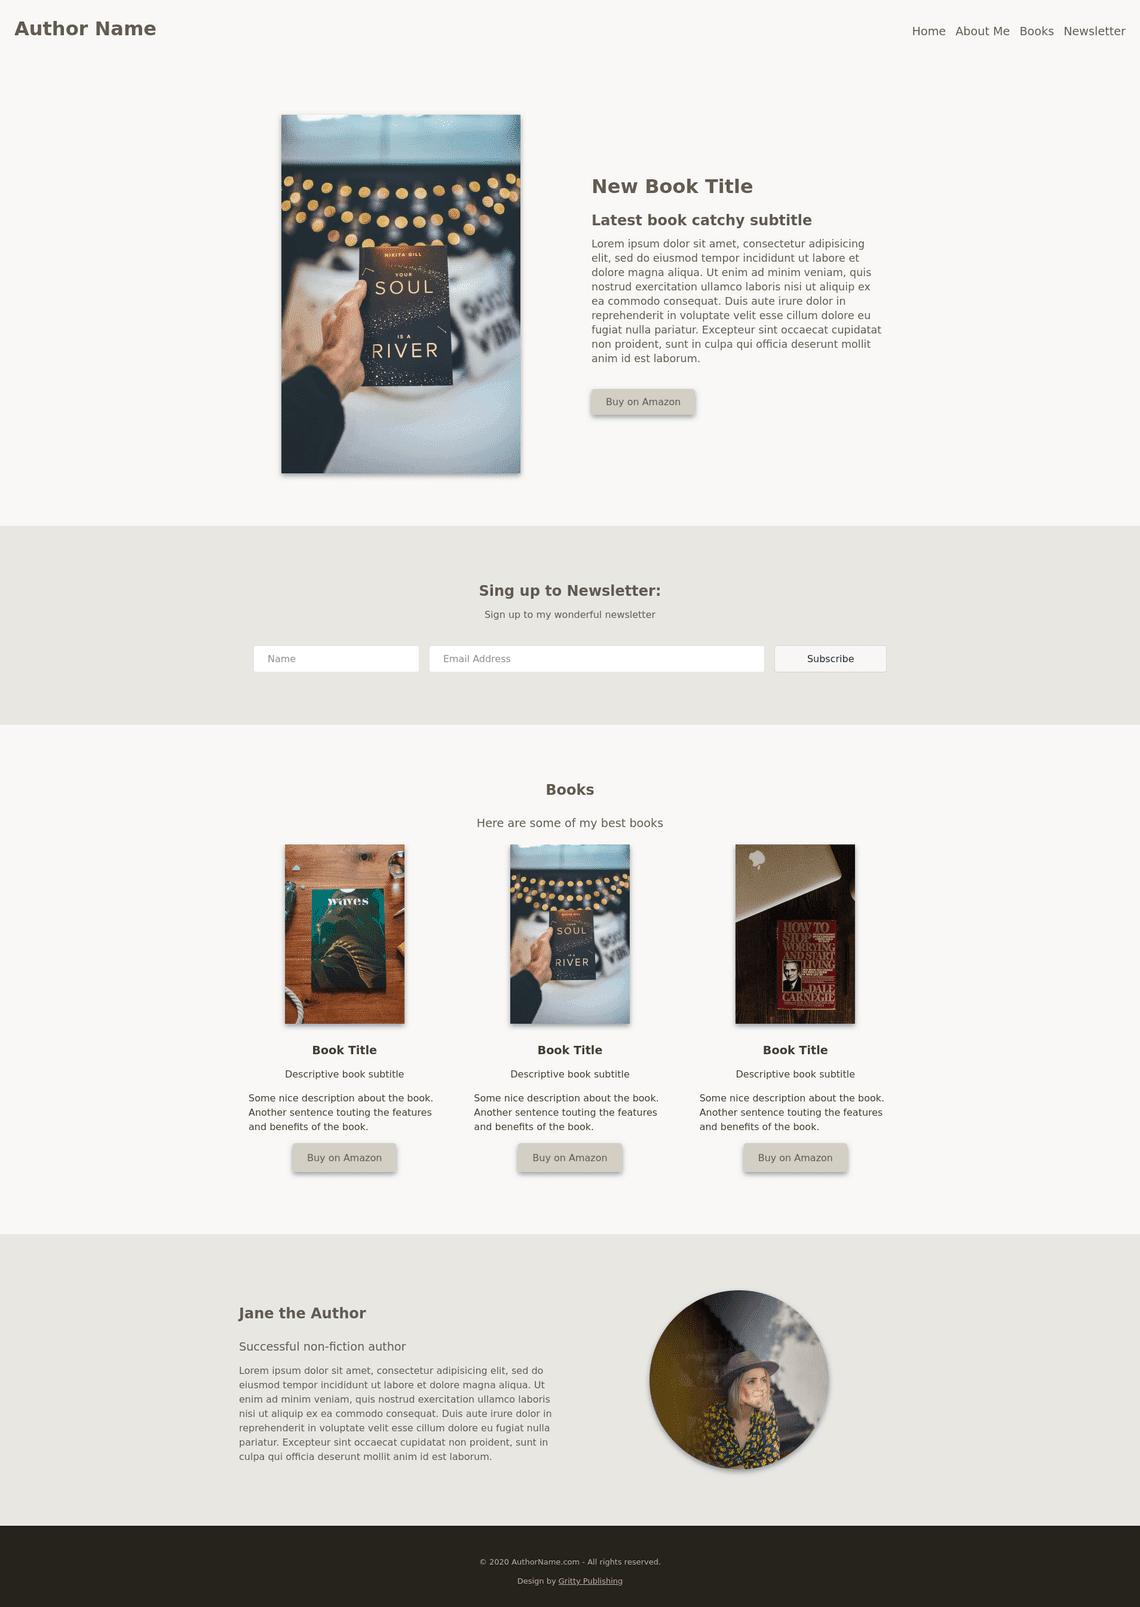 Author single-page website template